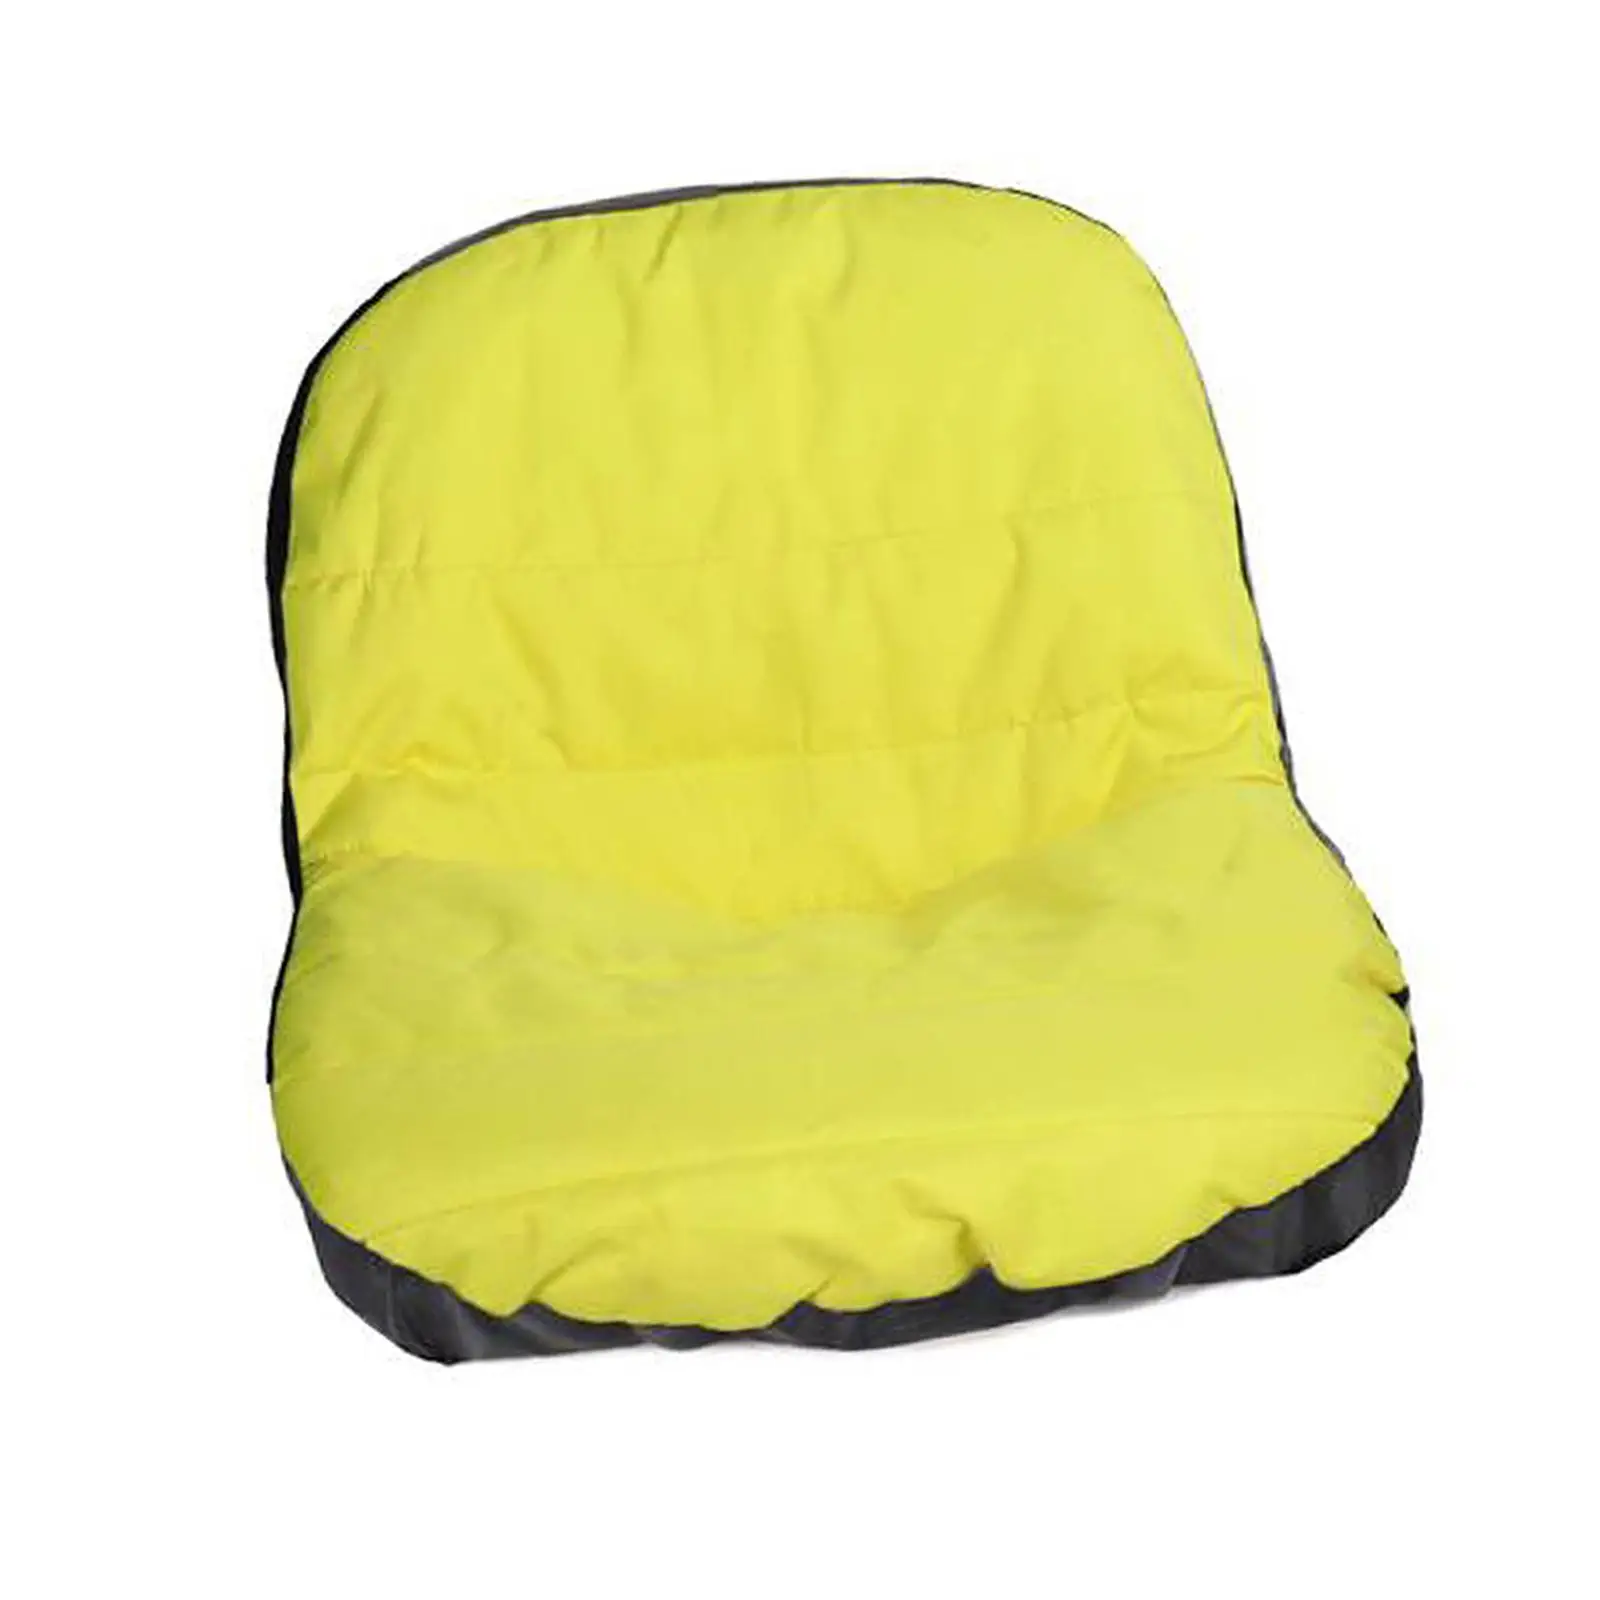 Mower Cushion Seat Cover Elastic Band Polyester Waterproof Lawn Mower Tractor Seat Cover for Mower Replacement Accessories